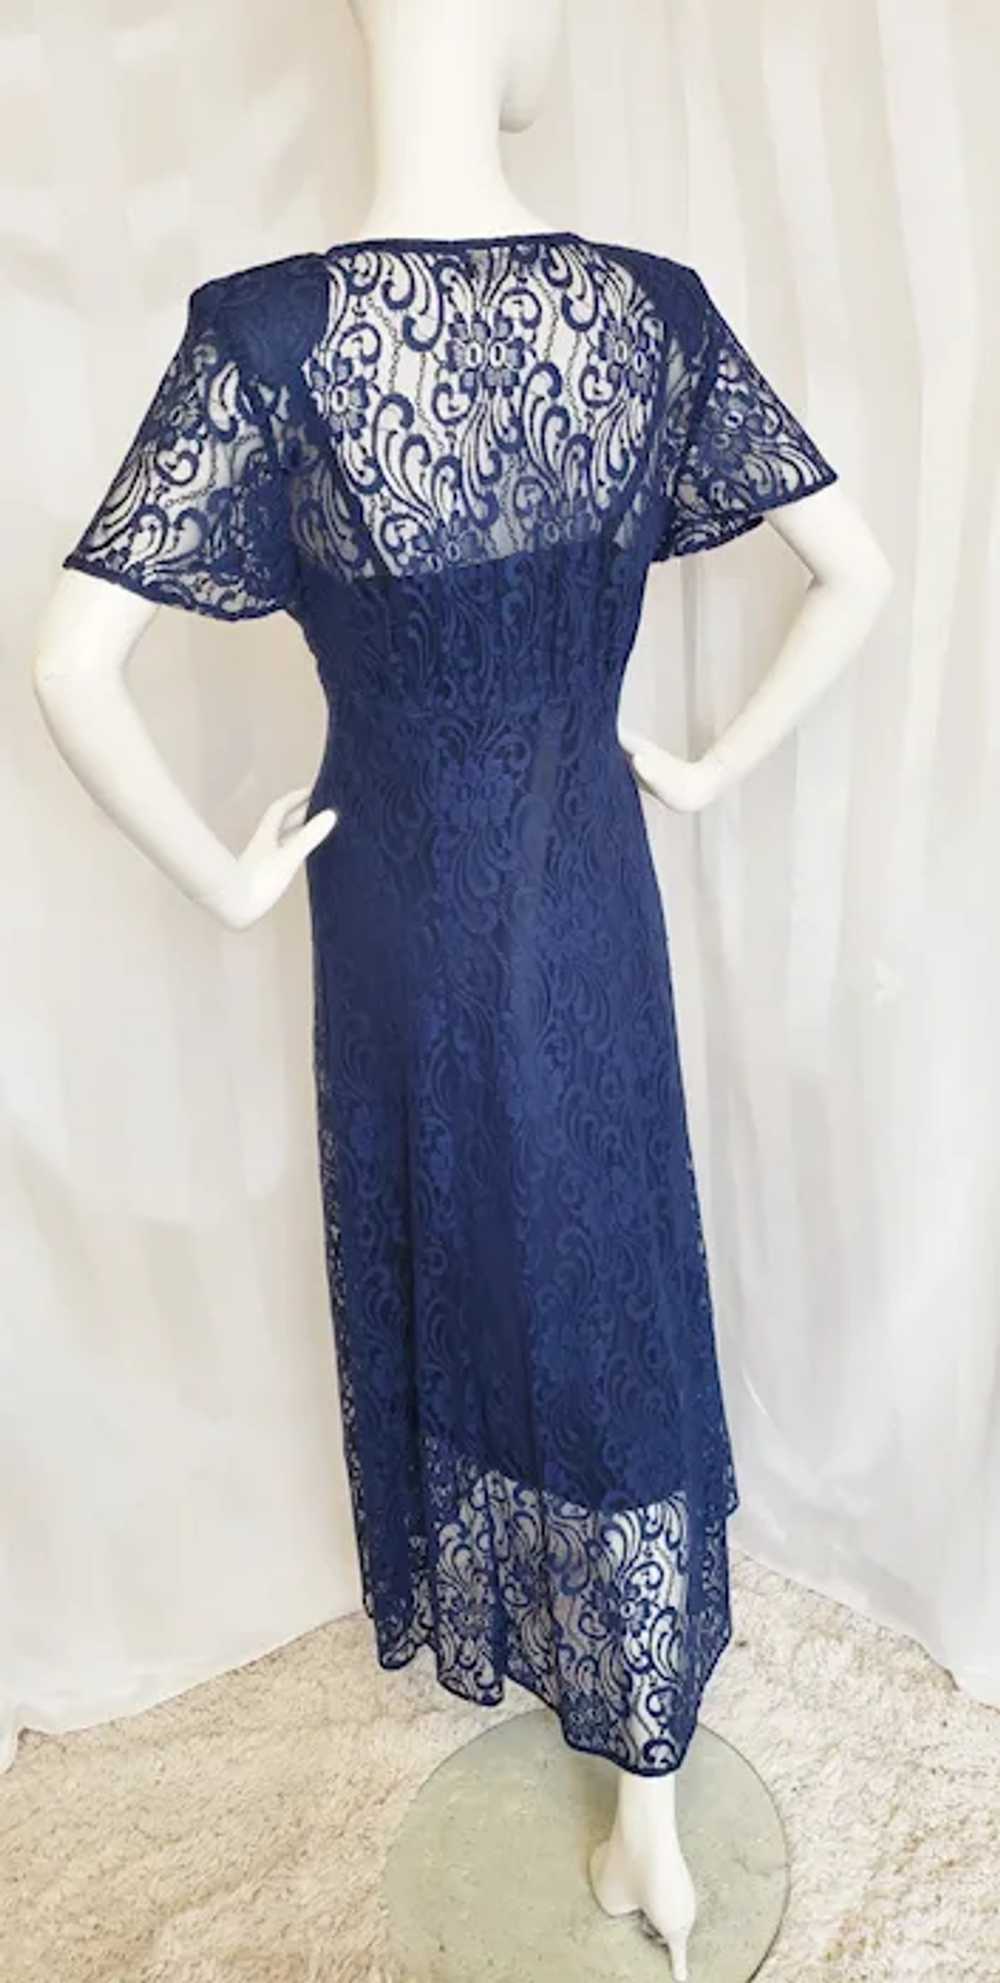 Romantic Lovely Lace Maxi Dress - image 8